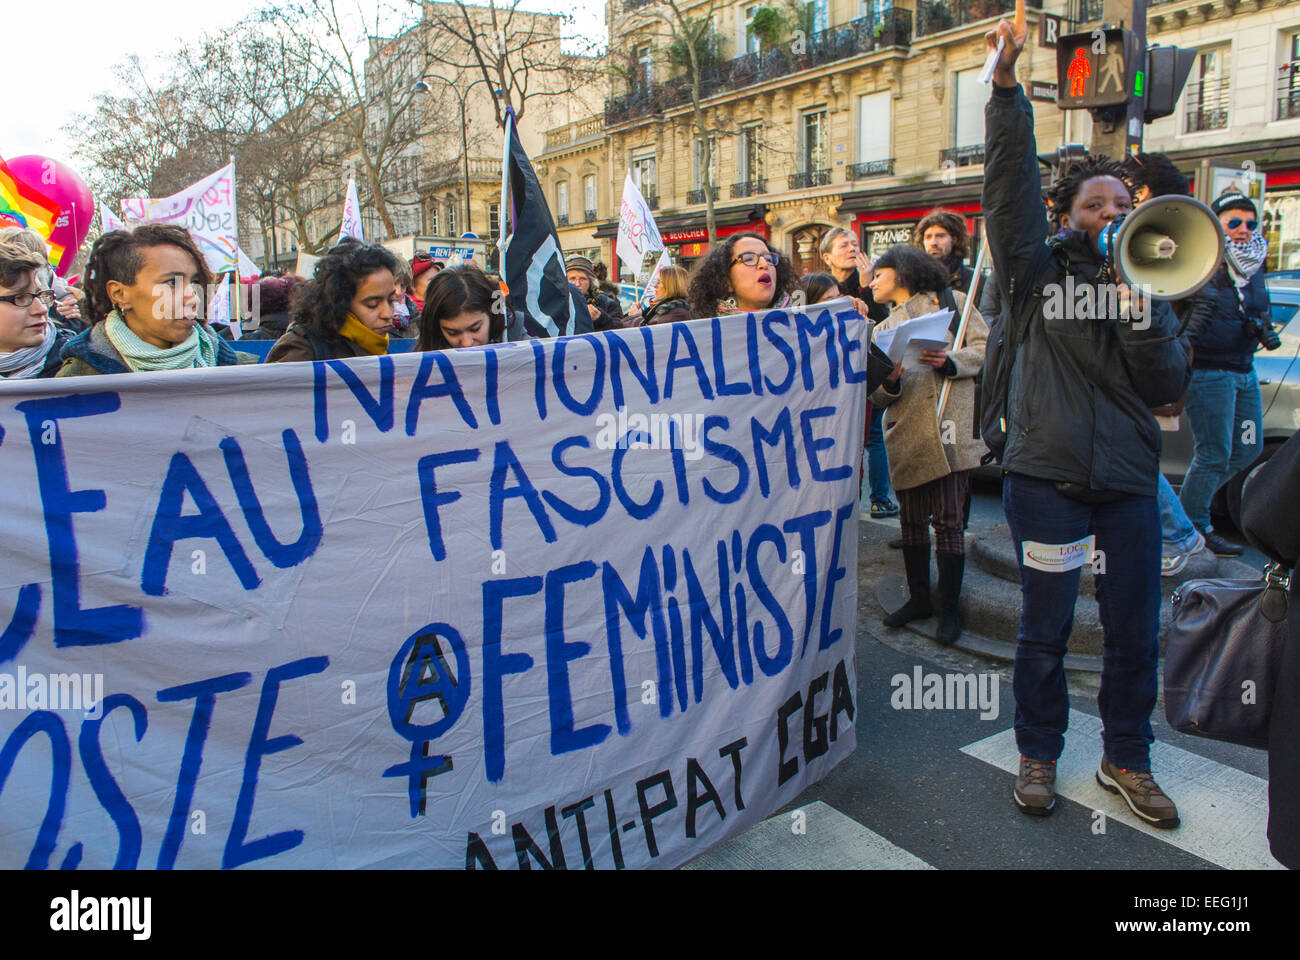 Paris, France, French N.G.O.'s Groups, Feminist Demonstration in Honor of 40th Anniversary of Abortion Law Legalization, Anti-Fascism Women Holding Banners 'pro Choice' women's rights march, pro abortion rally Stock Photo